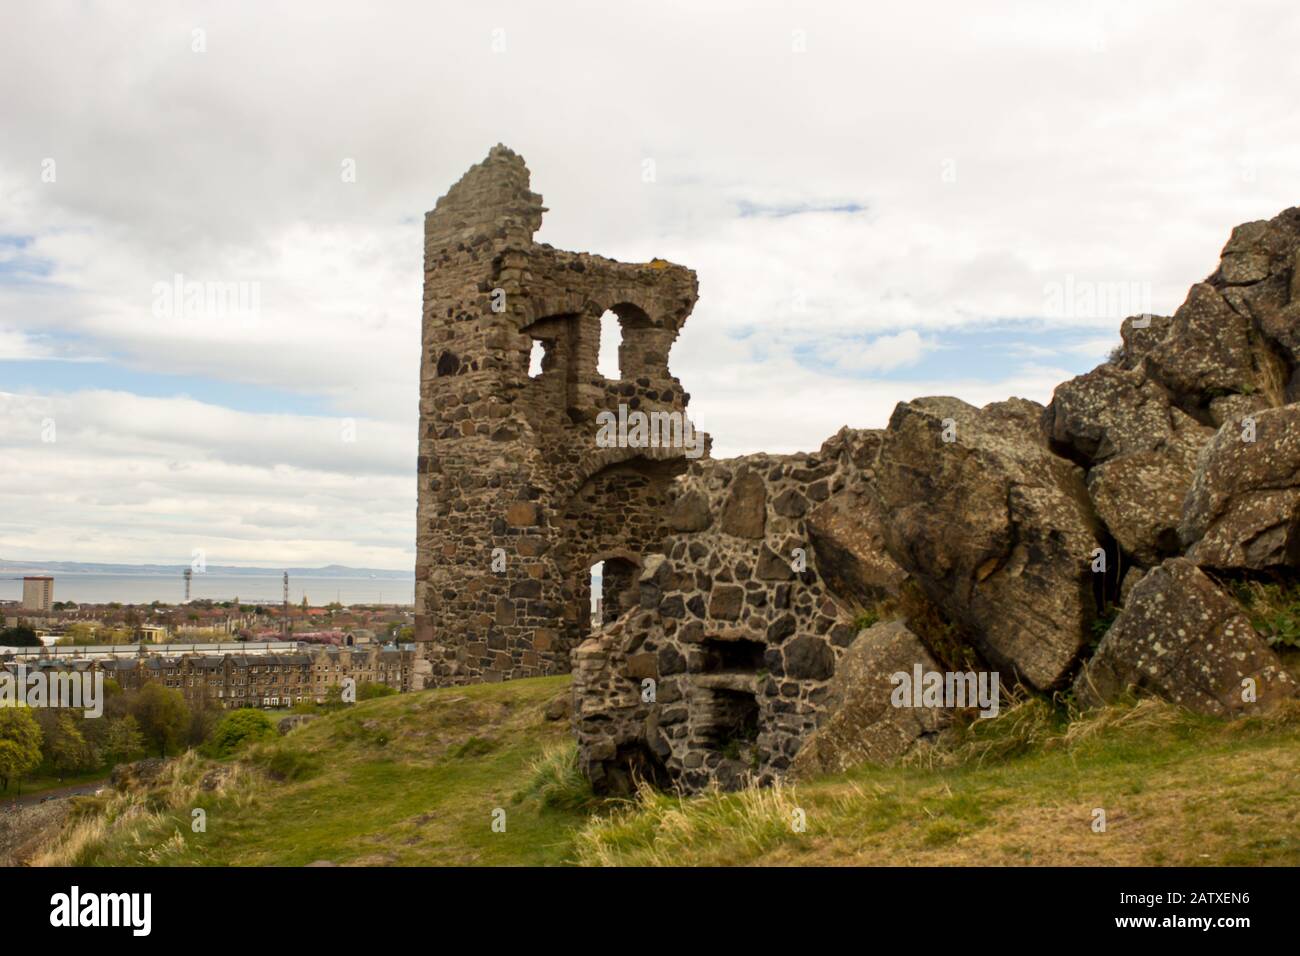 The ruin of St Anthony’s Chapel in Holyrood Park, with Leah and the Firth of Forth in the background, photographed early on a cloudy day in Edinburgh Stock Photo